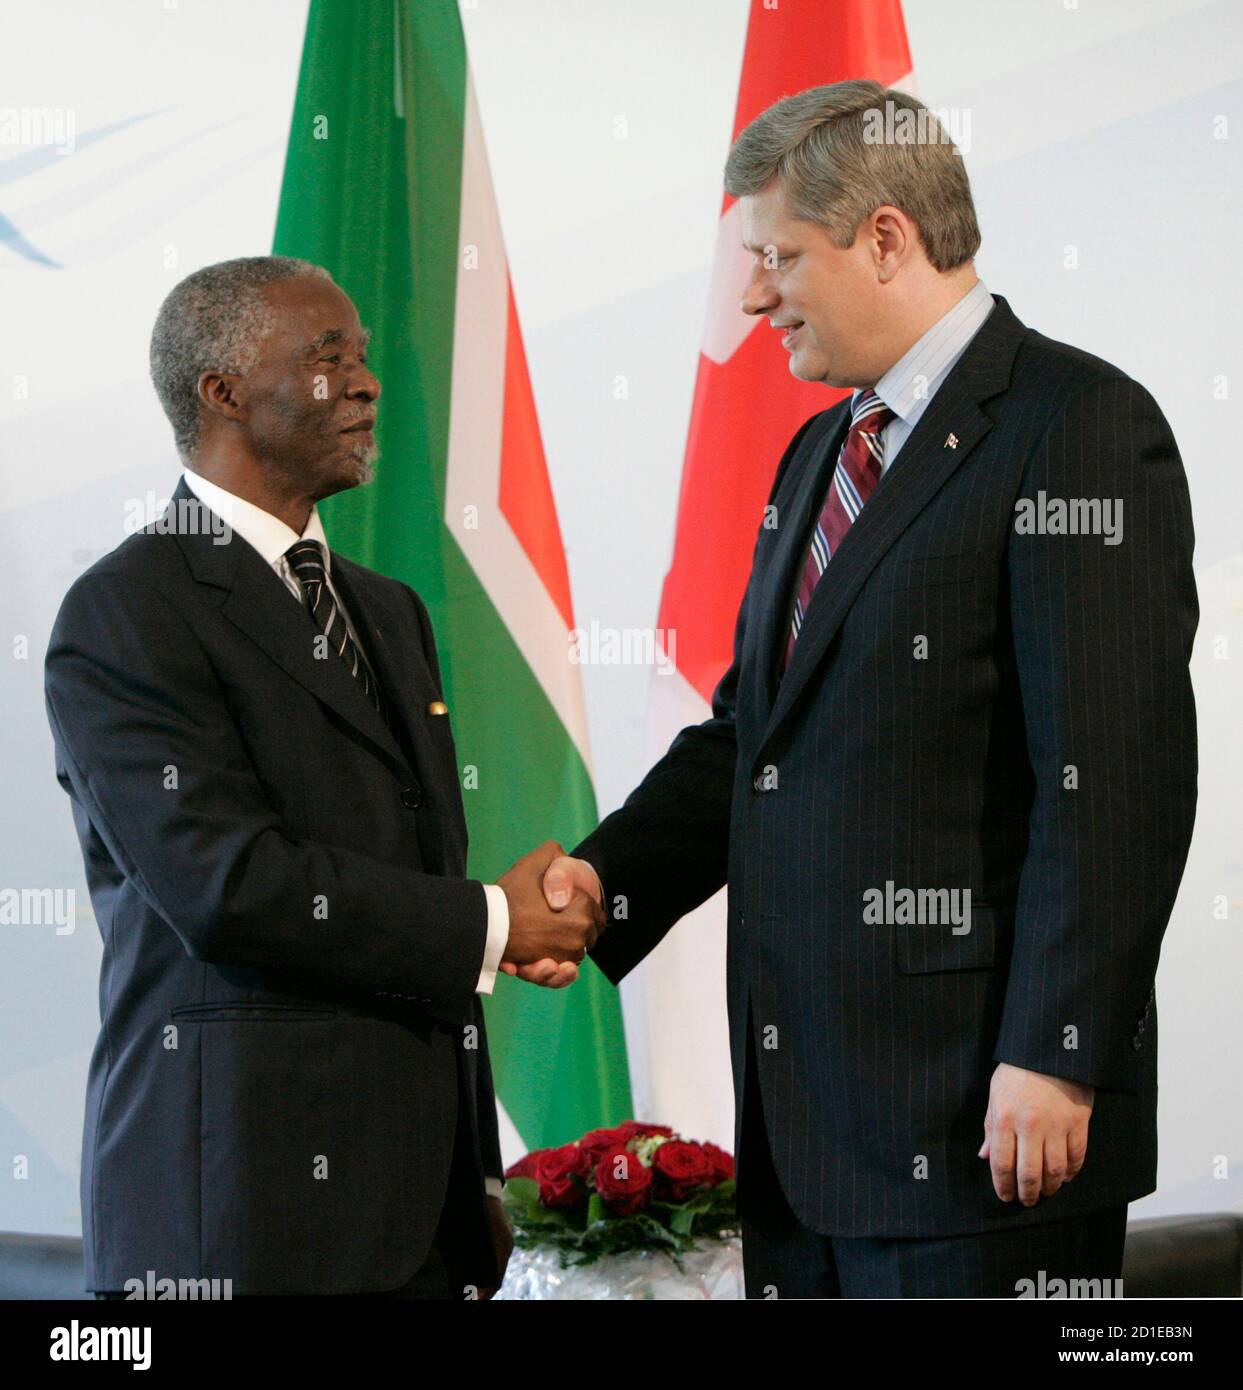 Canadian Prime Minister Stephen Harper (R) shakes hands with South African President Thabo Mbeki at the beginning of their meeting at the G8 Summit in Heiligendamm June 8, 2007.  World powers on  Friday pledged $60 billion to fight AIDS and other diseases ravaging Africa but development campaigners complained the Group of Eight had offered little fresh cash for the poor.         REUTERS/Chris Wattie   (GERMANY) Stock Photo